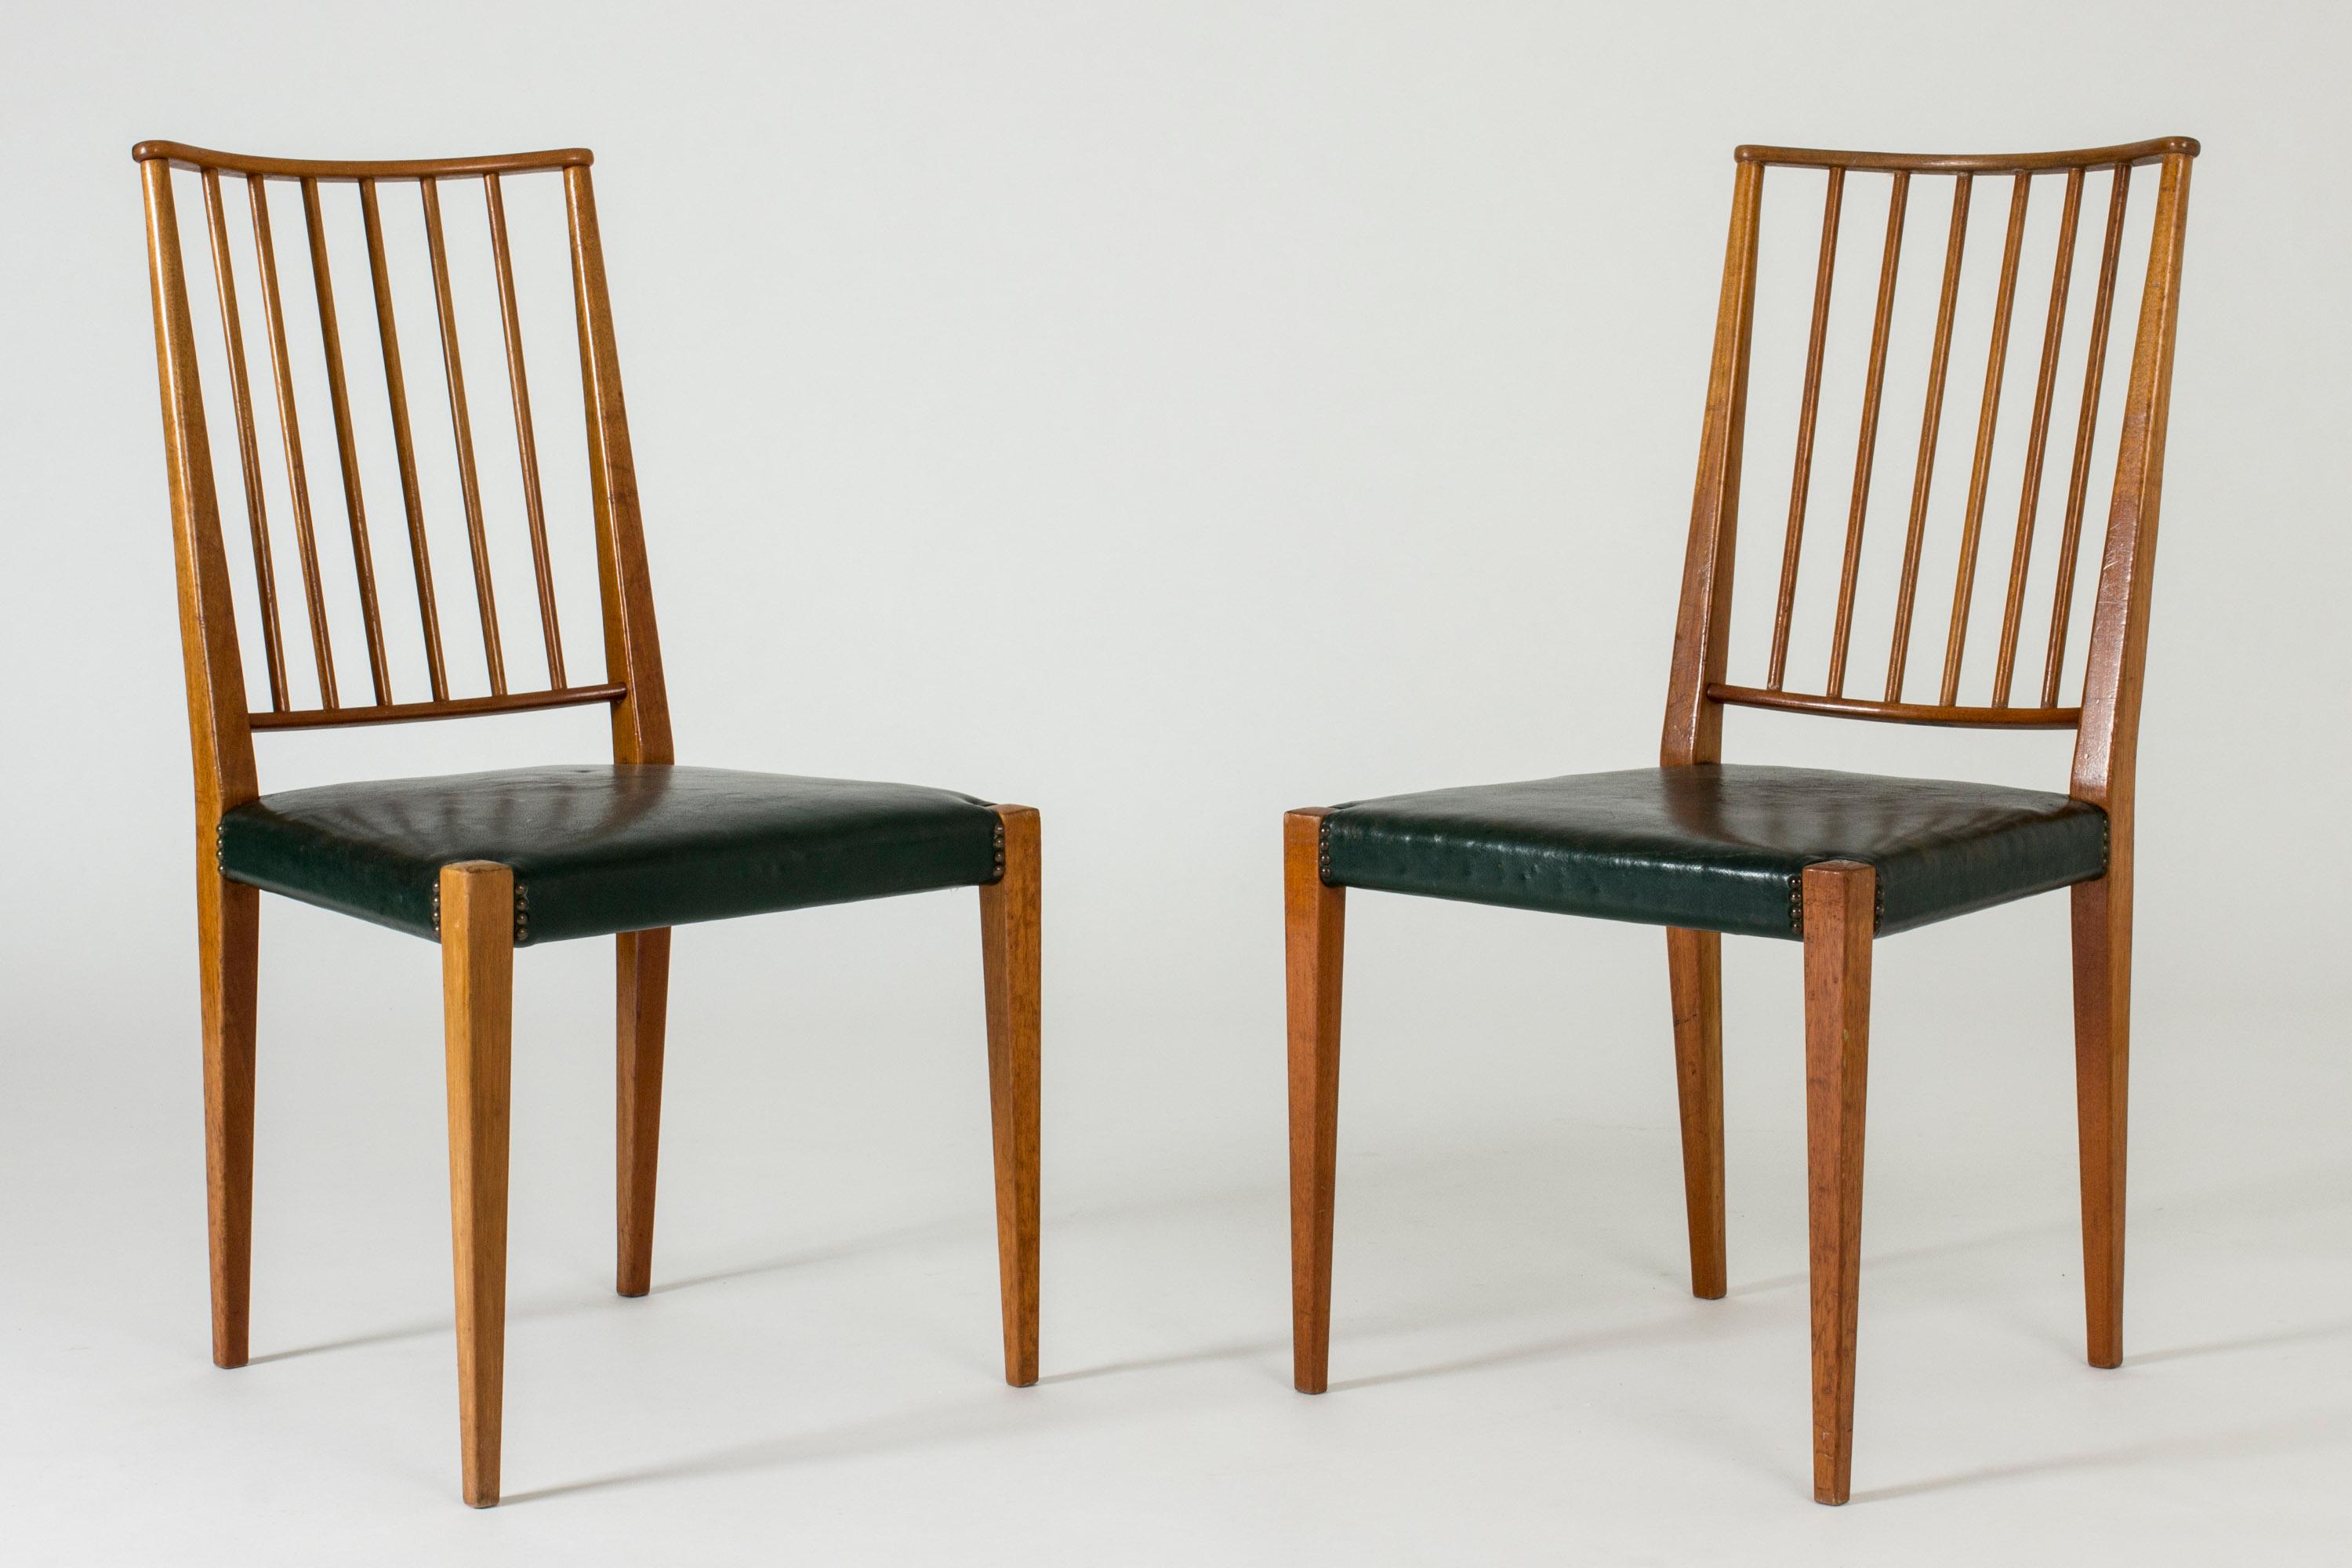 Scandinavian Modern Mahogany and Leather Dining Chairs by Josef Frank